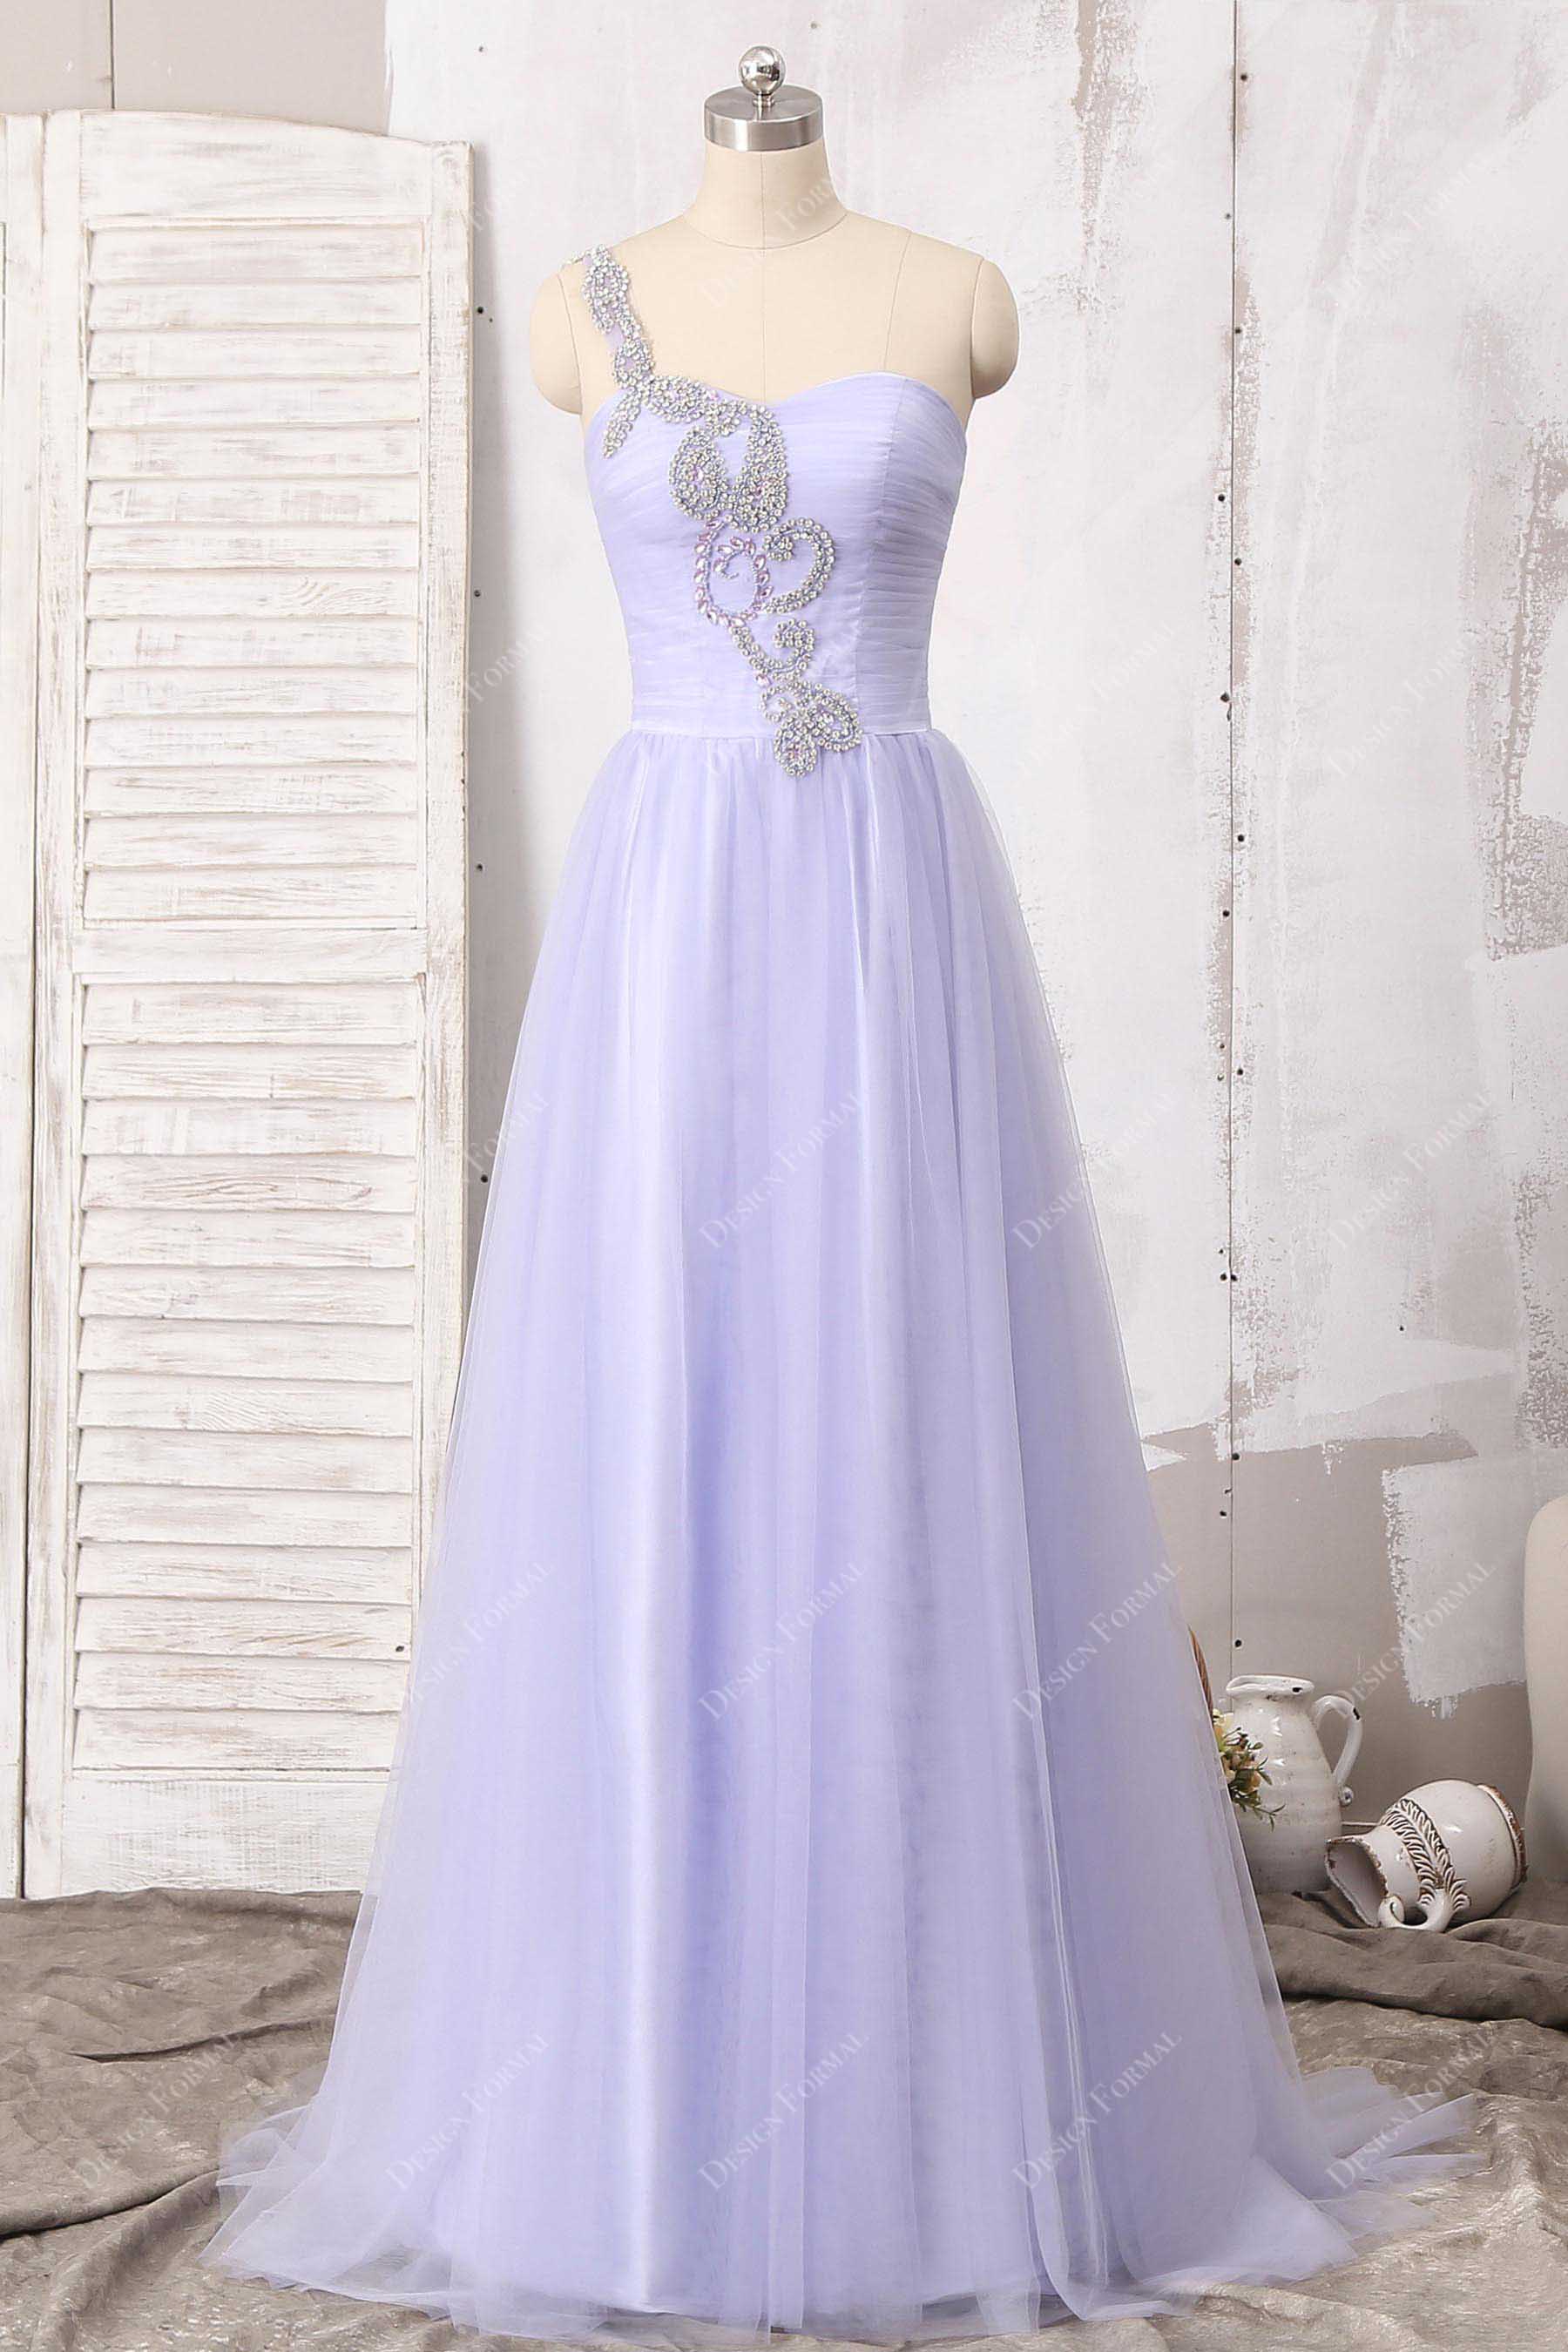 Lilac Halter Neck Tiered Tulle Handmade High-low Prom Dress